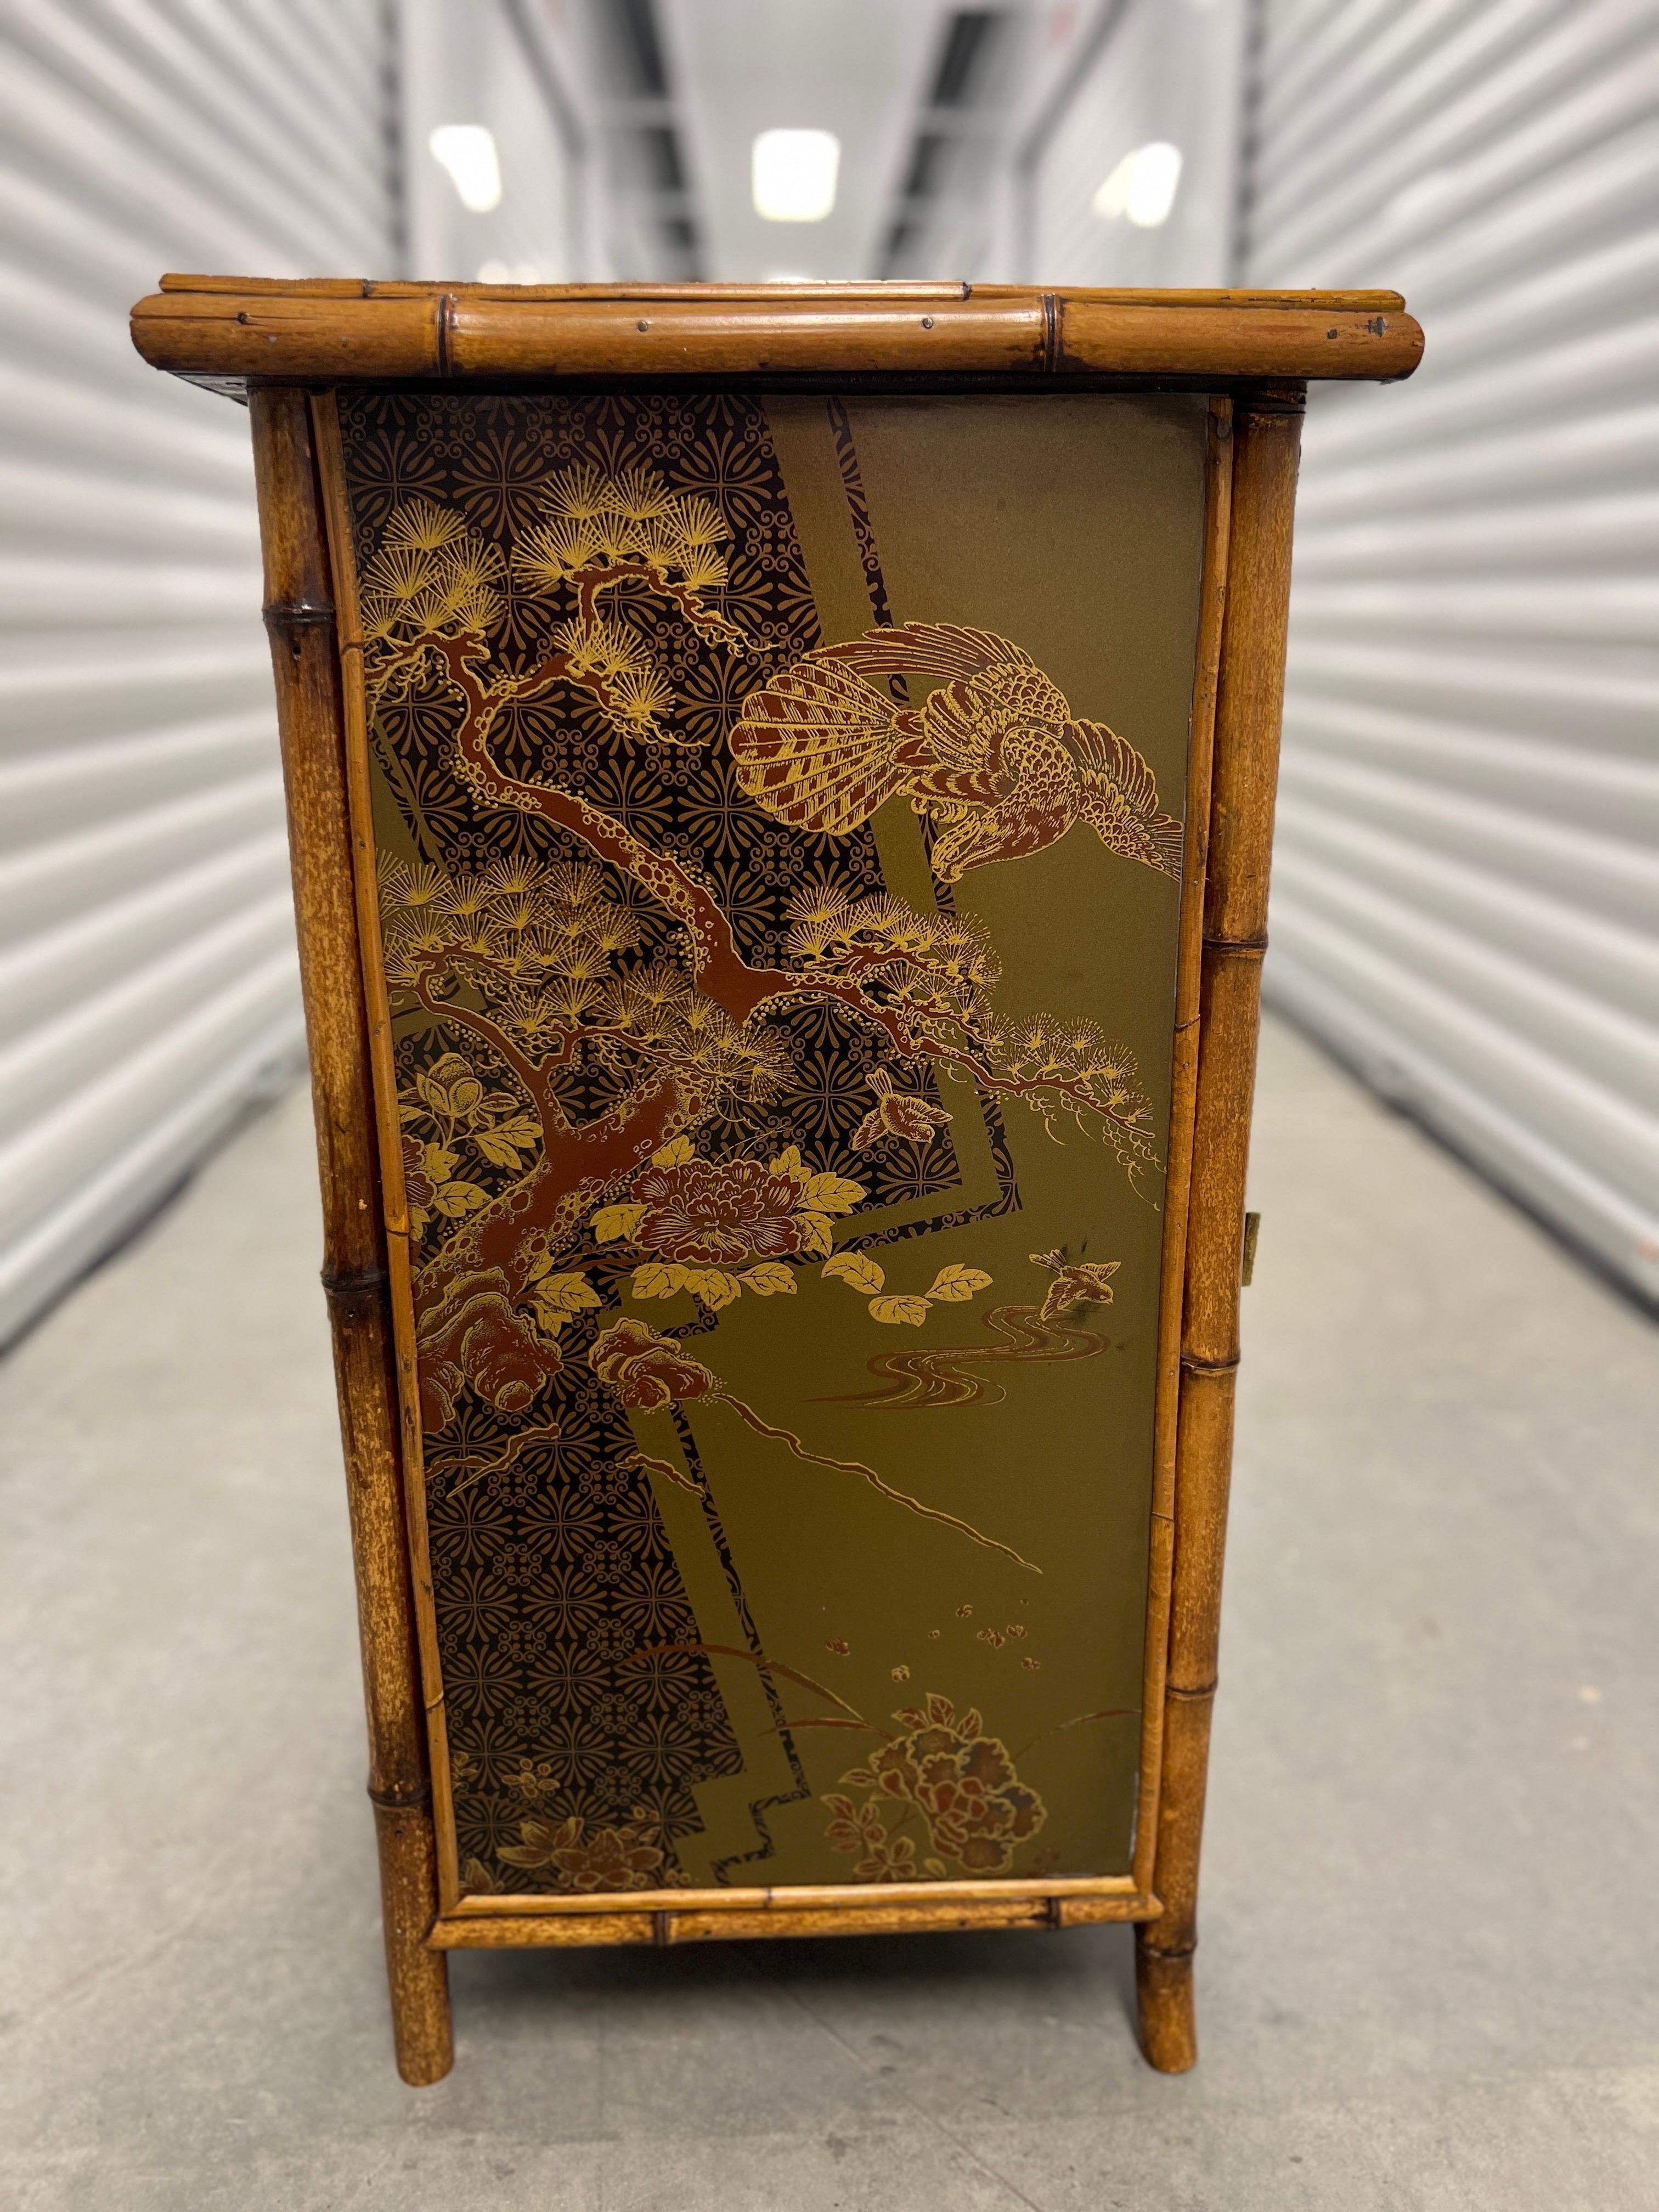 19th Century English Aesthetic Movement Japanned Bamboo Cabinet For Sale 5